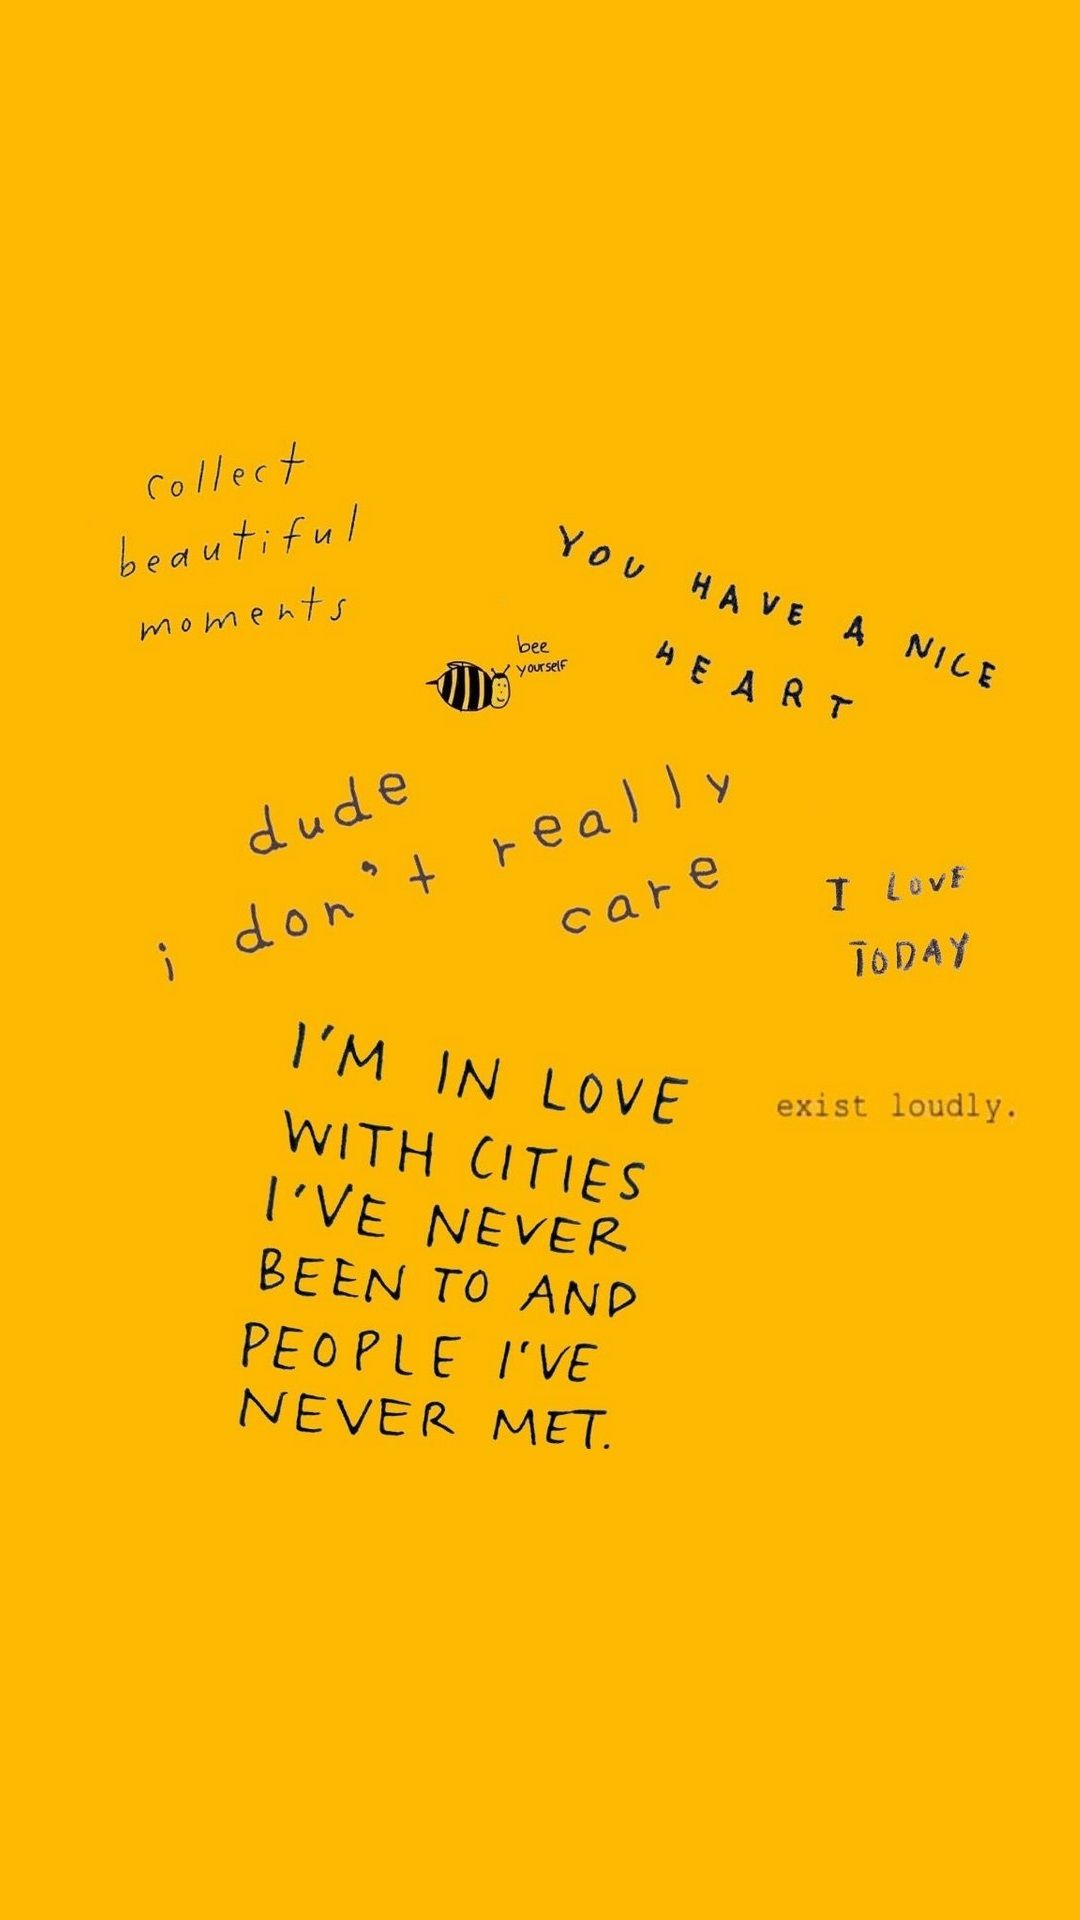 A yellow background with words and drawings - Yellow